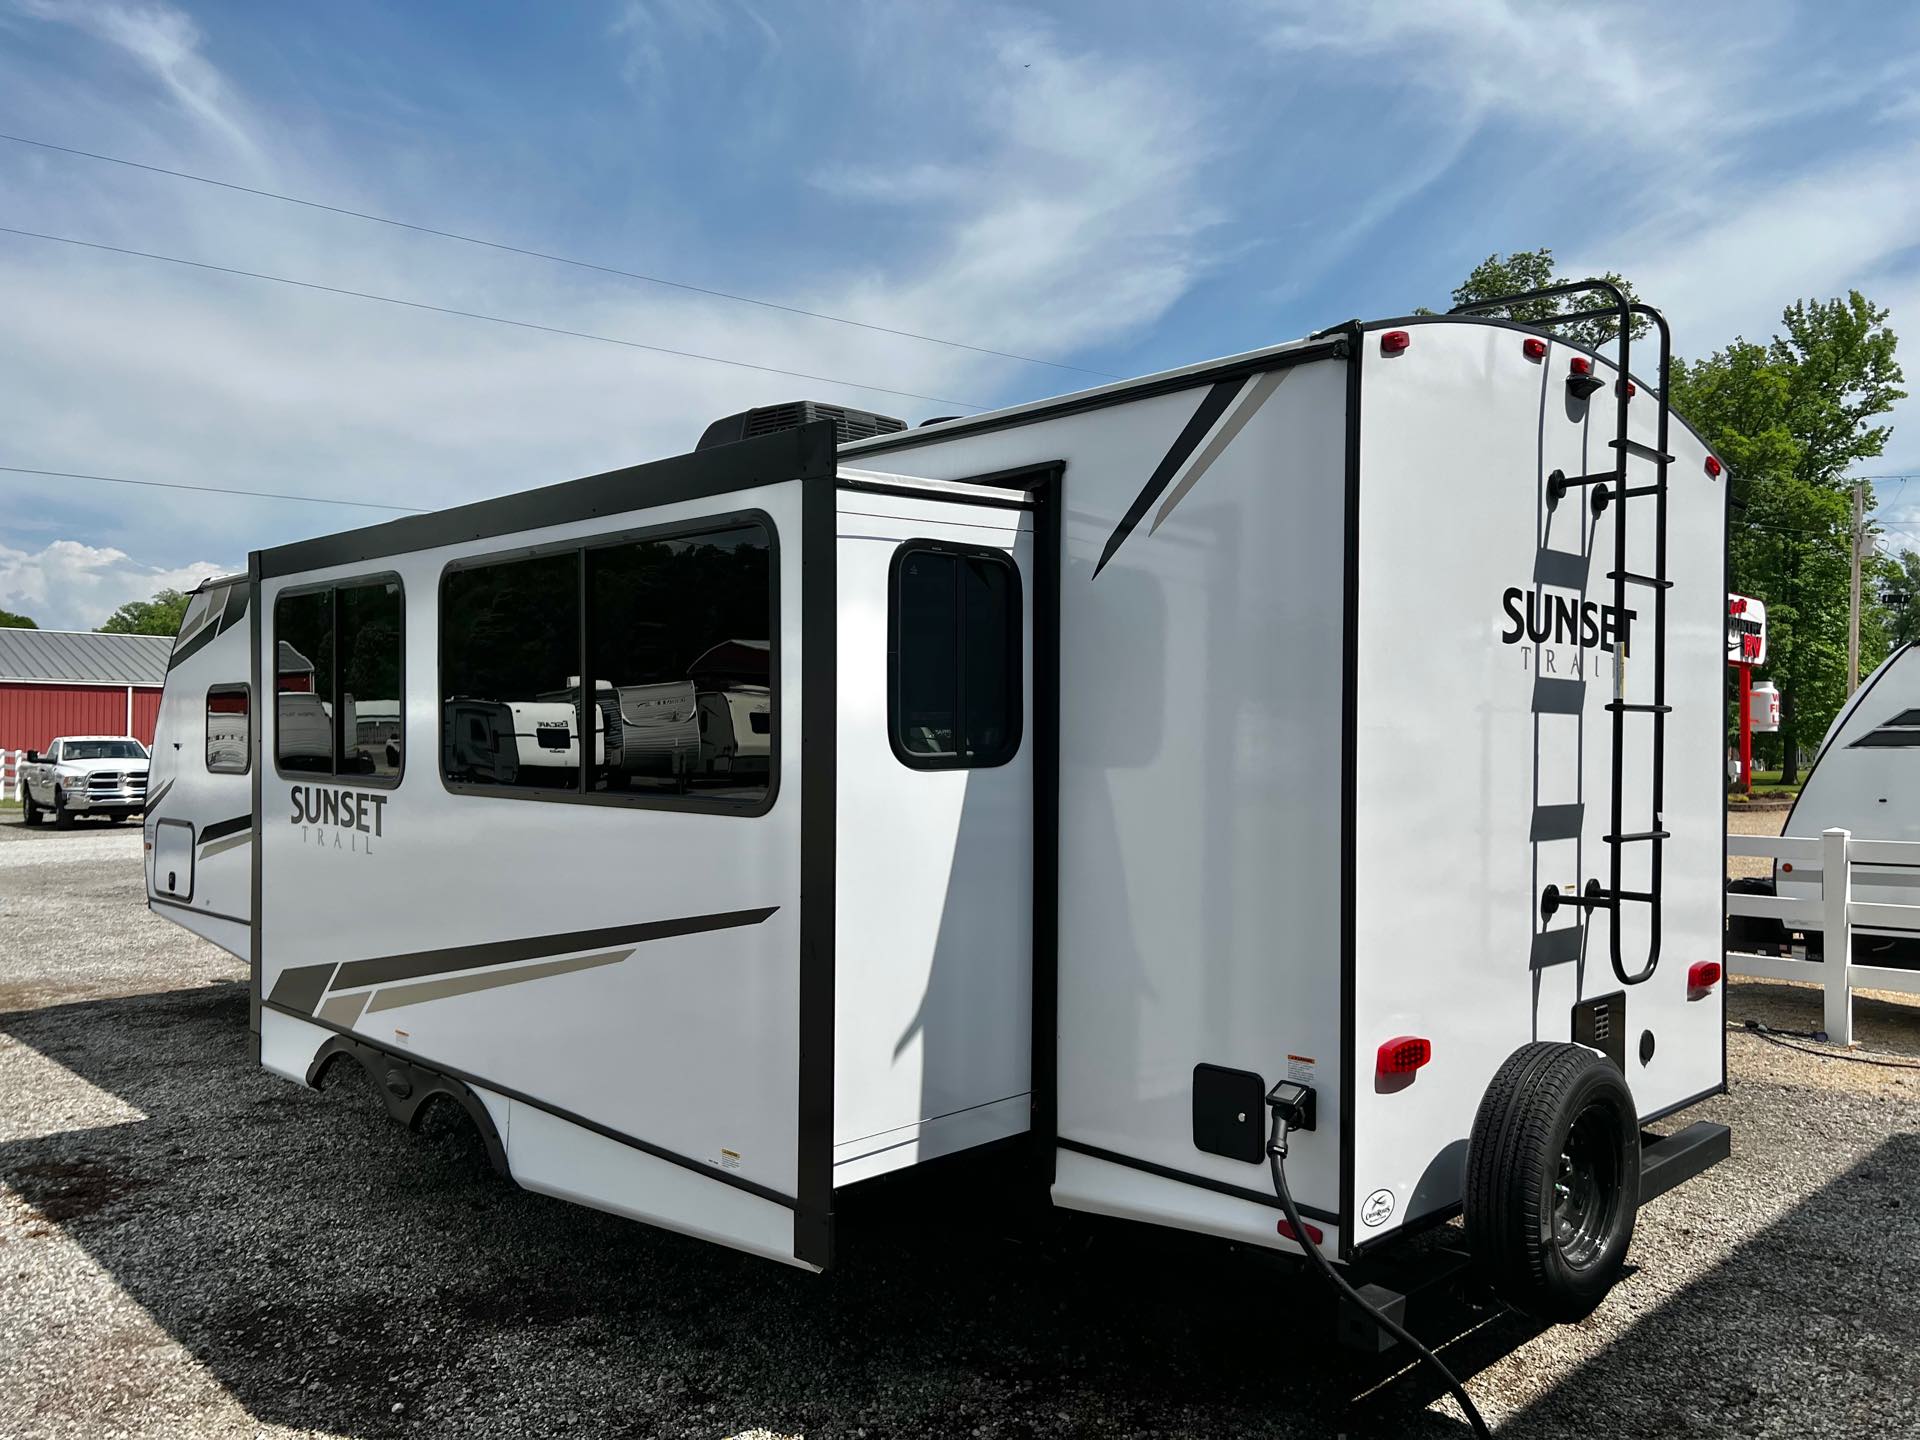 2022 CrossRoads Sunset Trail Super Lite SS291RK at Lee's Country RV